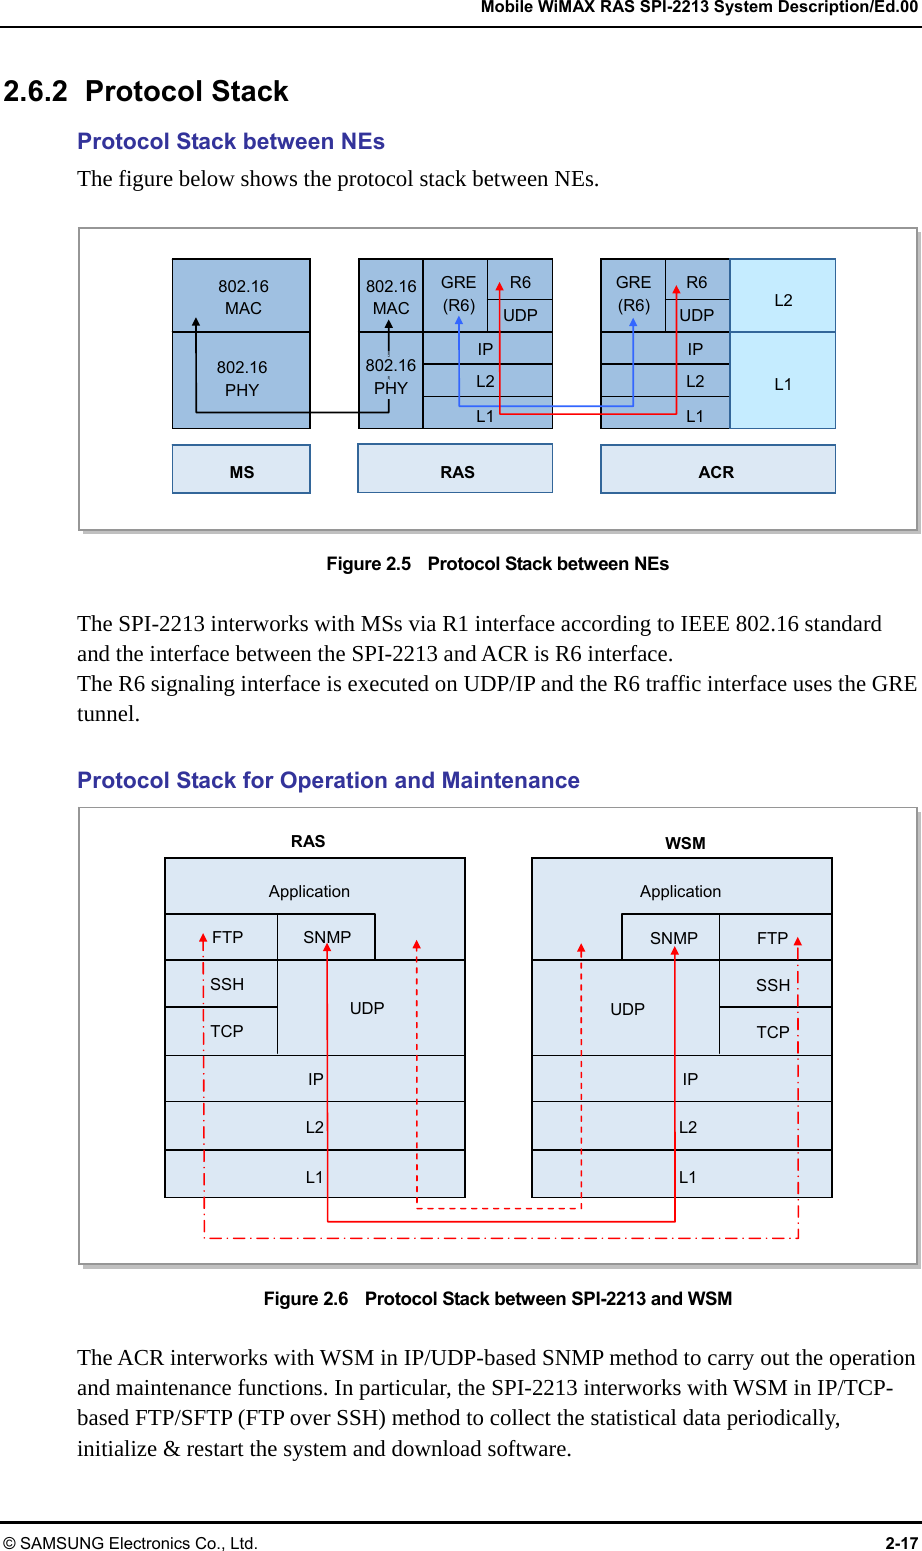   Mobile WiMAX RAS SPI-2213 System Description/Ed.00 © SAMSUNG Electronics Co., Ltd.  2-17 2.6.2 Protocol Stack Protocol Stack between NEs The figure below shows the protocol stack between NEs.  Figure 2.5    Protocol Stack between NEs  The SPI-2213 interworks with MSs via R1 interface according to IEEE 802.16 standard and the interface between the SPI-2213 and ACR is R6 interface. The R6 signaling interface is executed on UDP/IP and the R6 traffic interface uses the GRE tunnel.  Protocol Stack for Operation and Maintenance Figure 2.6    Protocol Stack between SPI-2213 and WSM  The ACR interworks with WSM in IP/UDP-based SNMP method to carry out the operation and maintenance functions. In particular, the SPI-2213 interworks with WSM in IP/TCP-based FTP/SFTP (FTP over SSH) method to collect the statistical data periodically, initialize &amp; restart the system and download software. 16PHY802.16  MAC 802.16  PHY 802.16 MAC GRE(R6)R6UDPIPL2L1MS RAS ACR GRE(R6)R6 UDP L2 L1 IP L2 L1 802.16 PHY WSM RAS IPApplicationFTP TCP SSHFTP TCP SSHL2 IP Application SNMPUDP UDPSNMPL1 L2 L1 